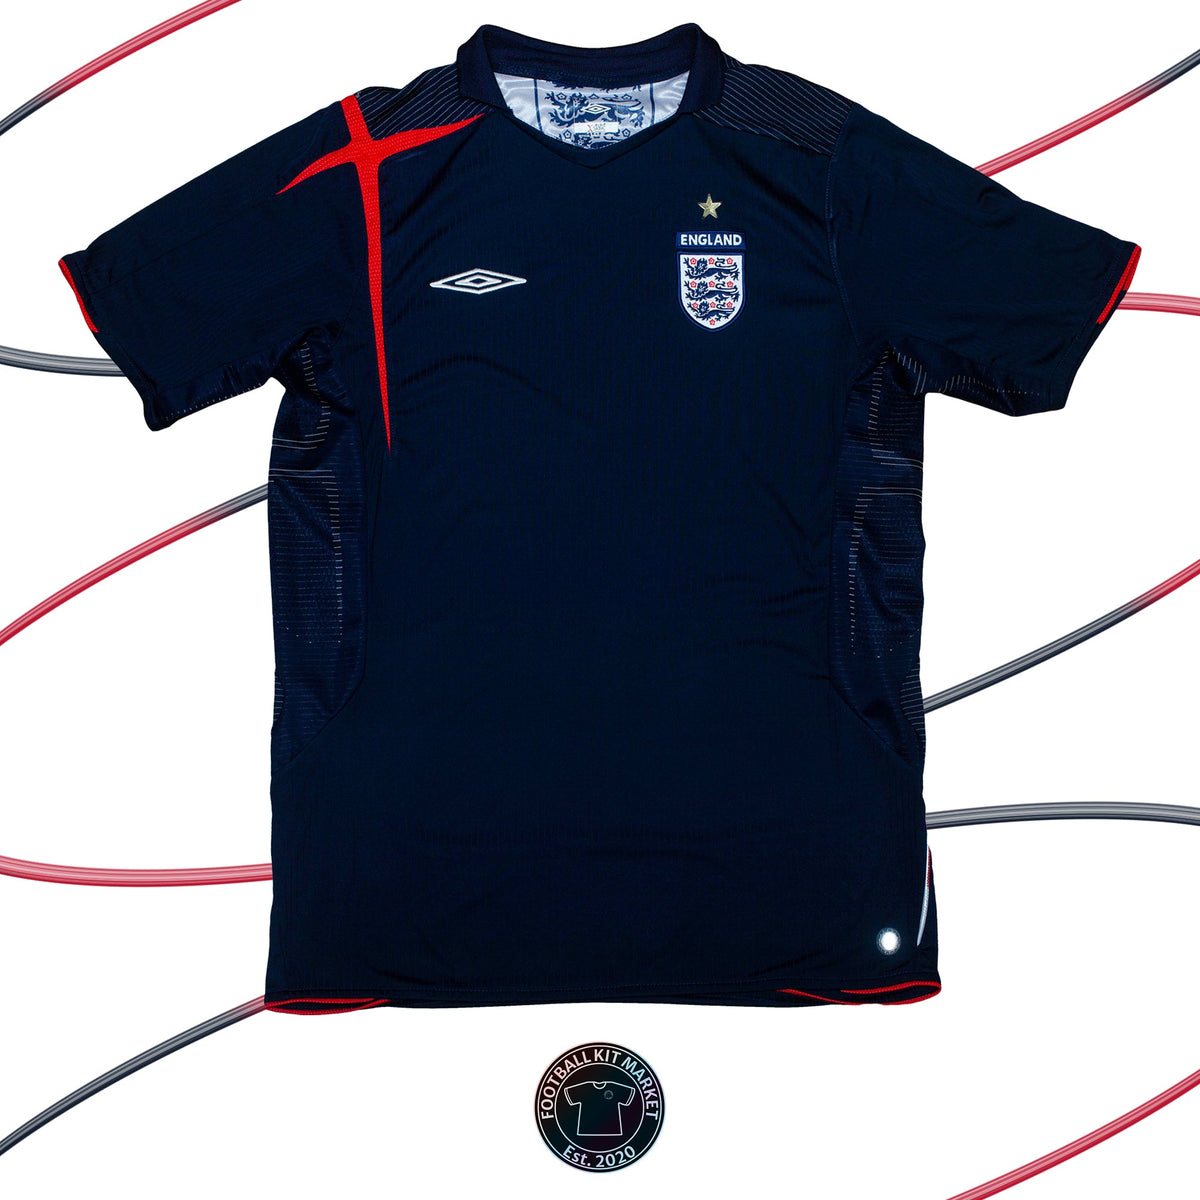 Genuine ENGLAND 3rd Shirt (2005-2007) - UMBRO (L) - Product Image from Football Kit Market